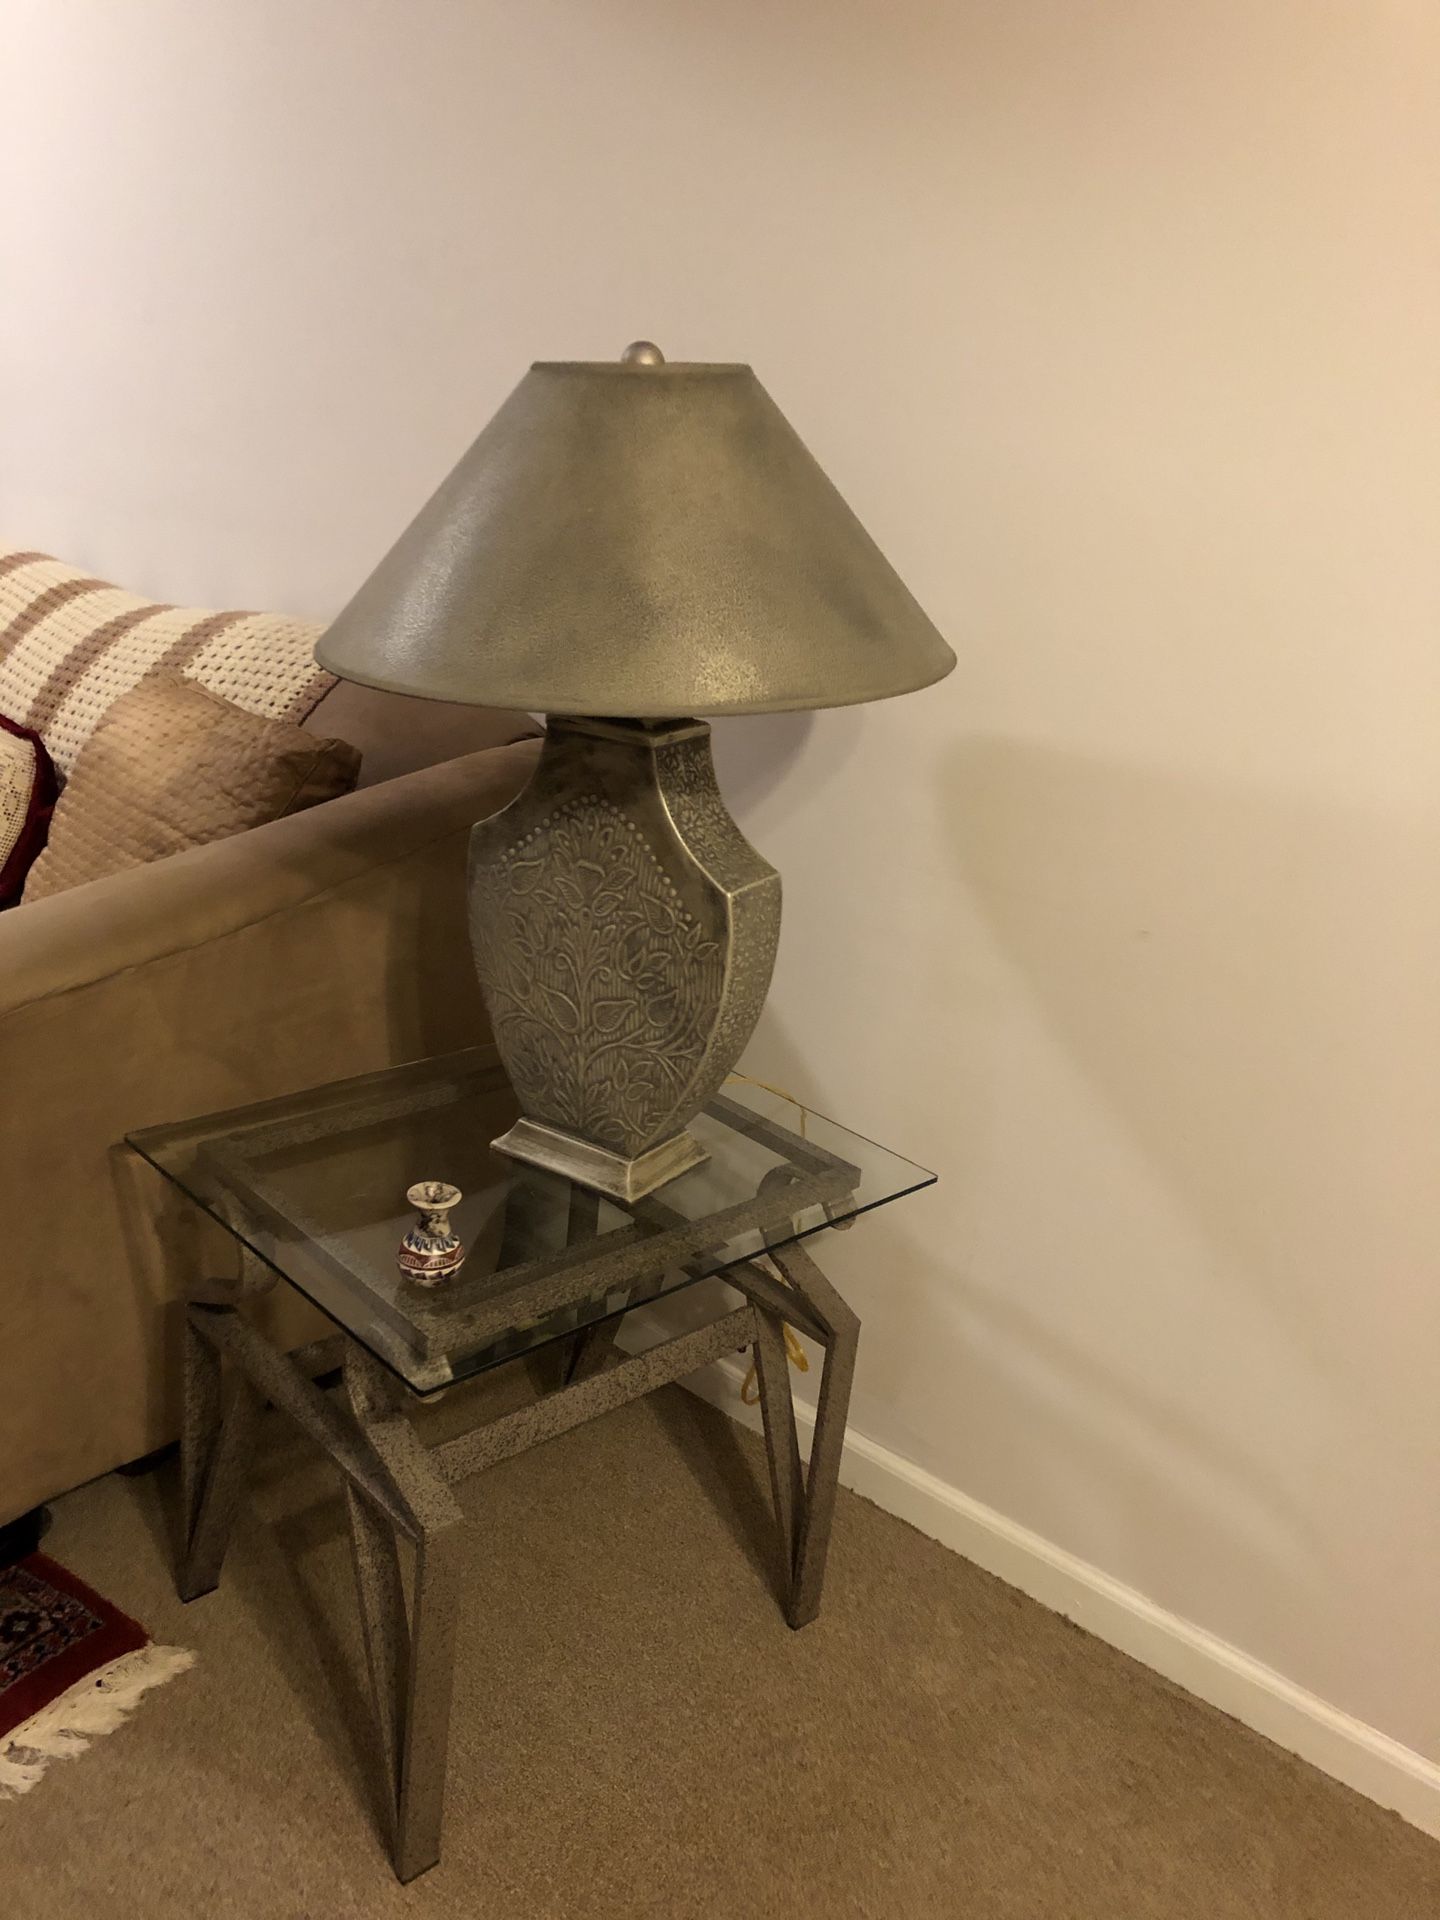 Lamp and coffee table set